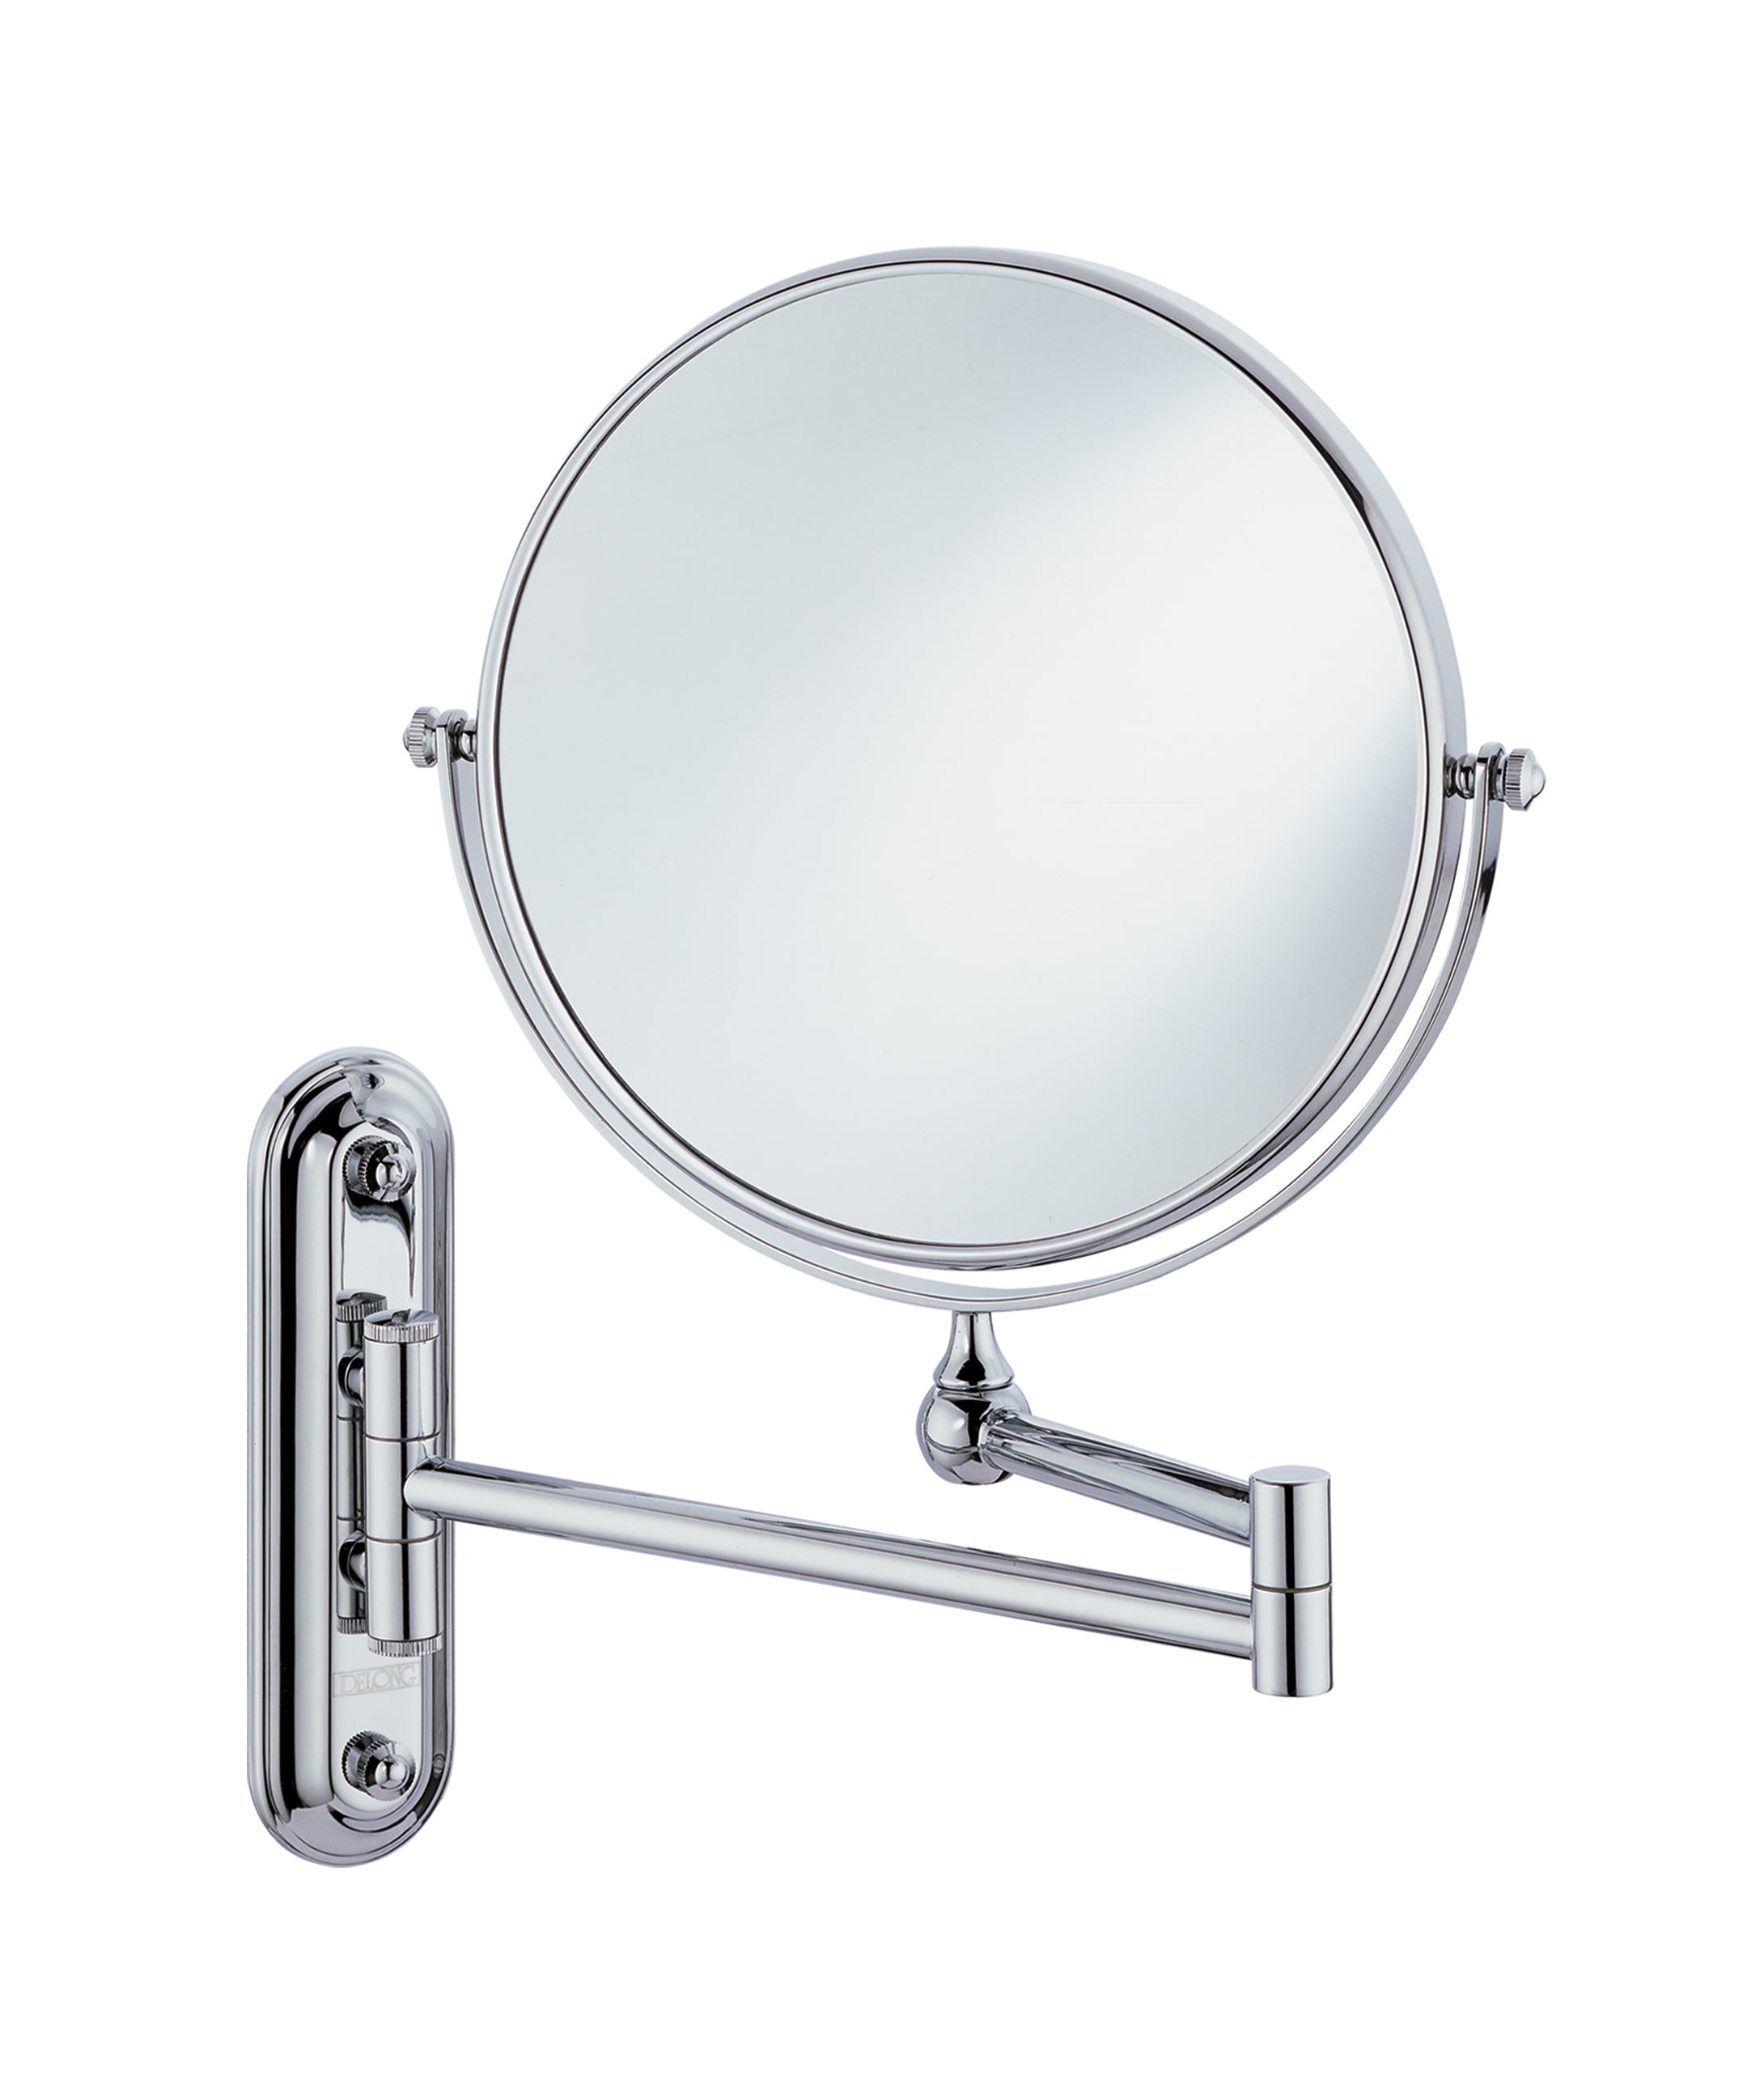 Better Living Products Cosmo Wall Mount Mirror with Folding Arm Chrome 